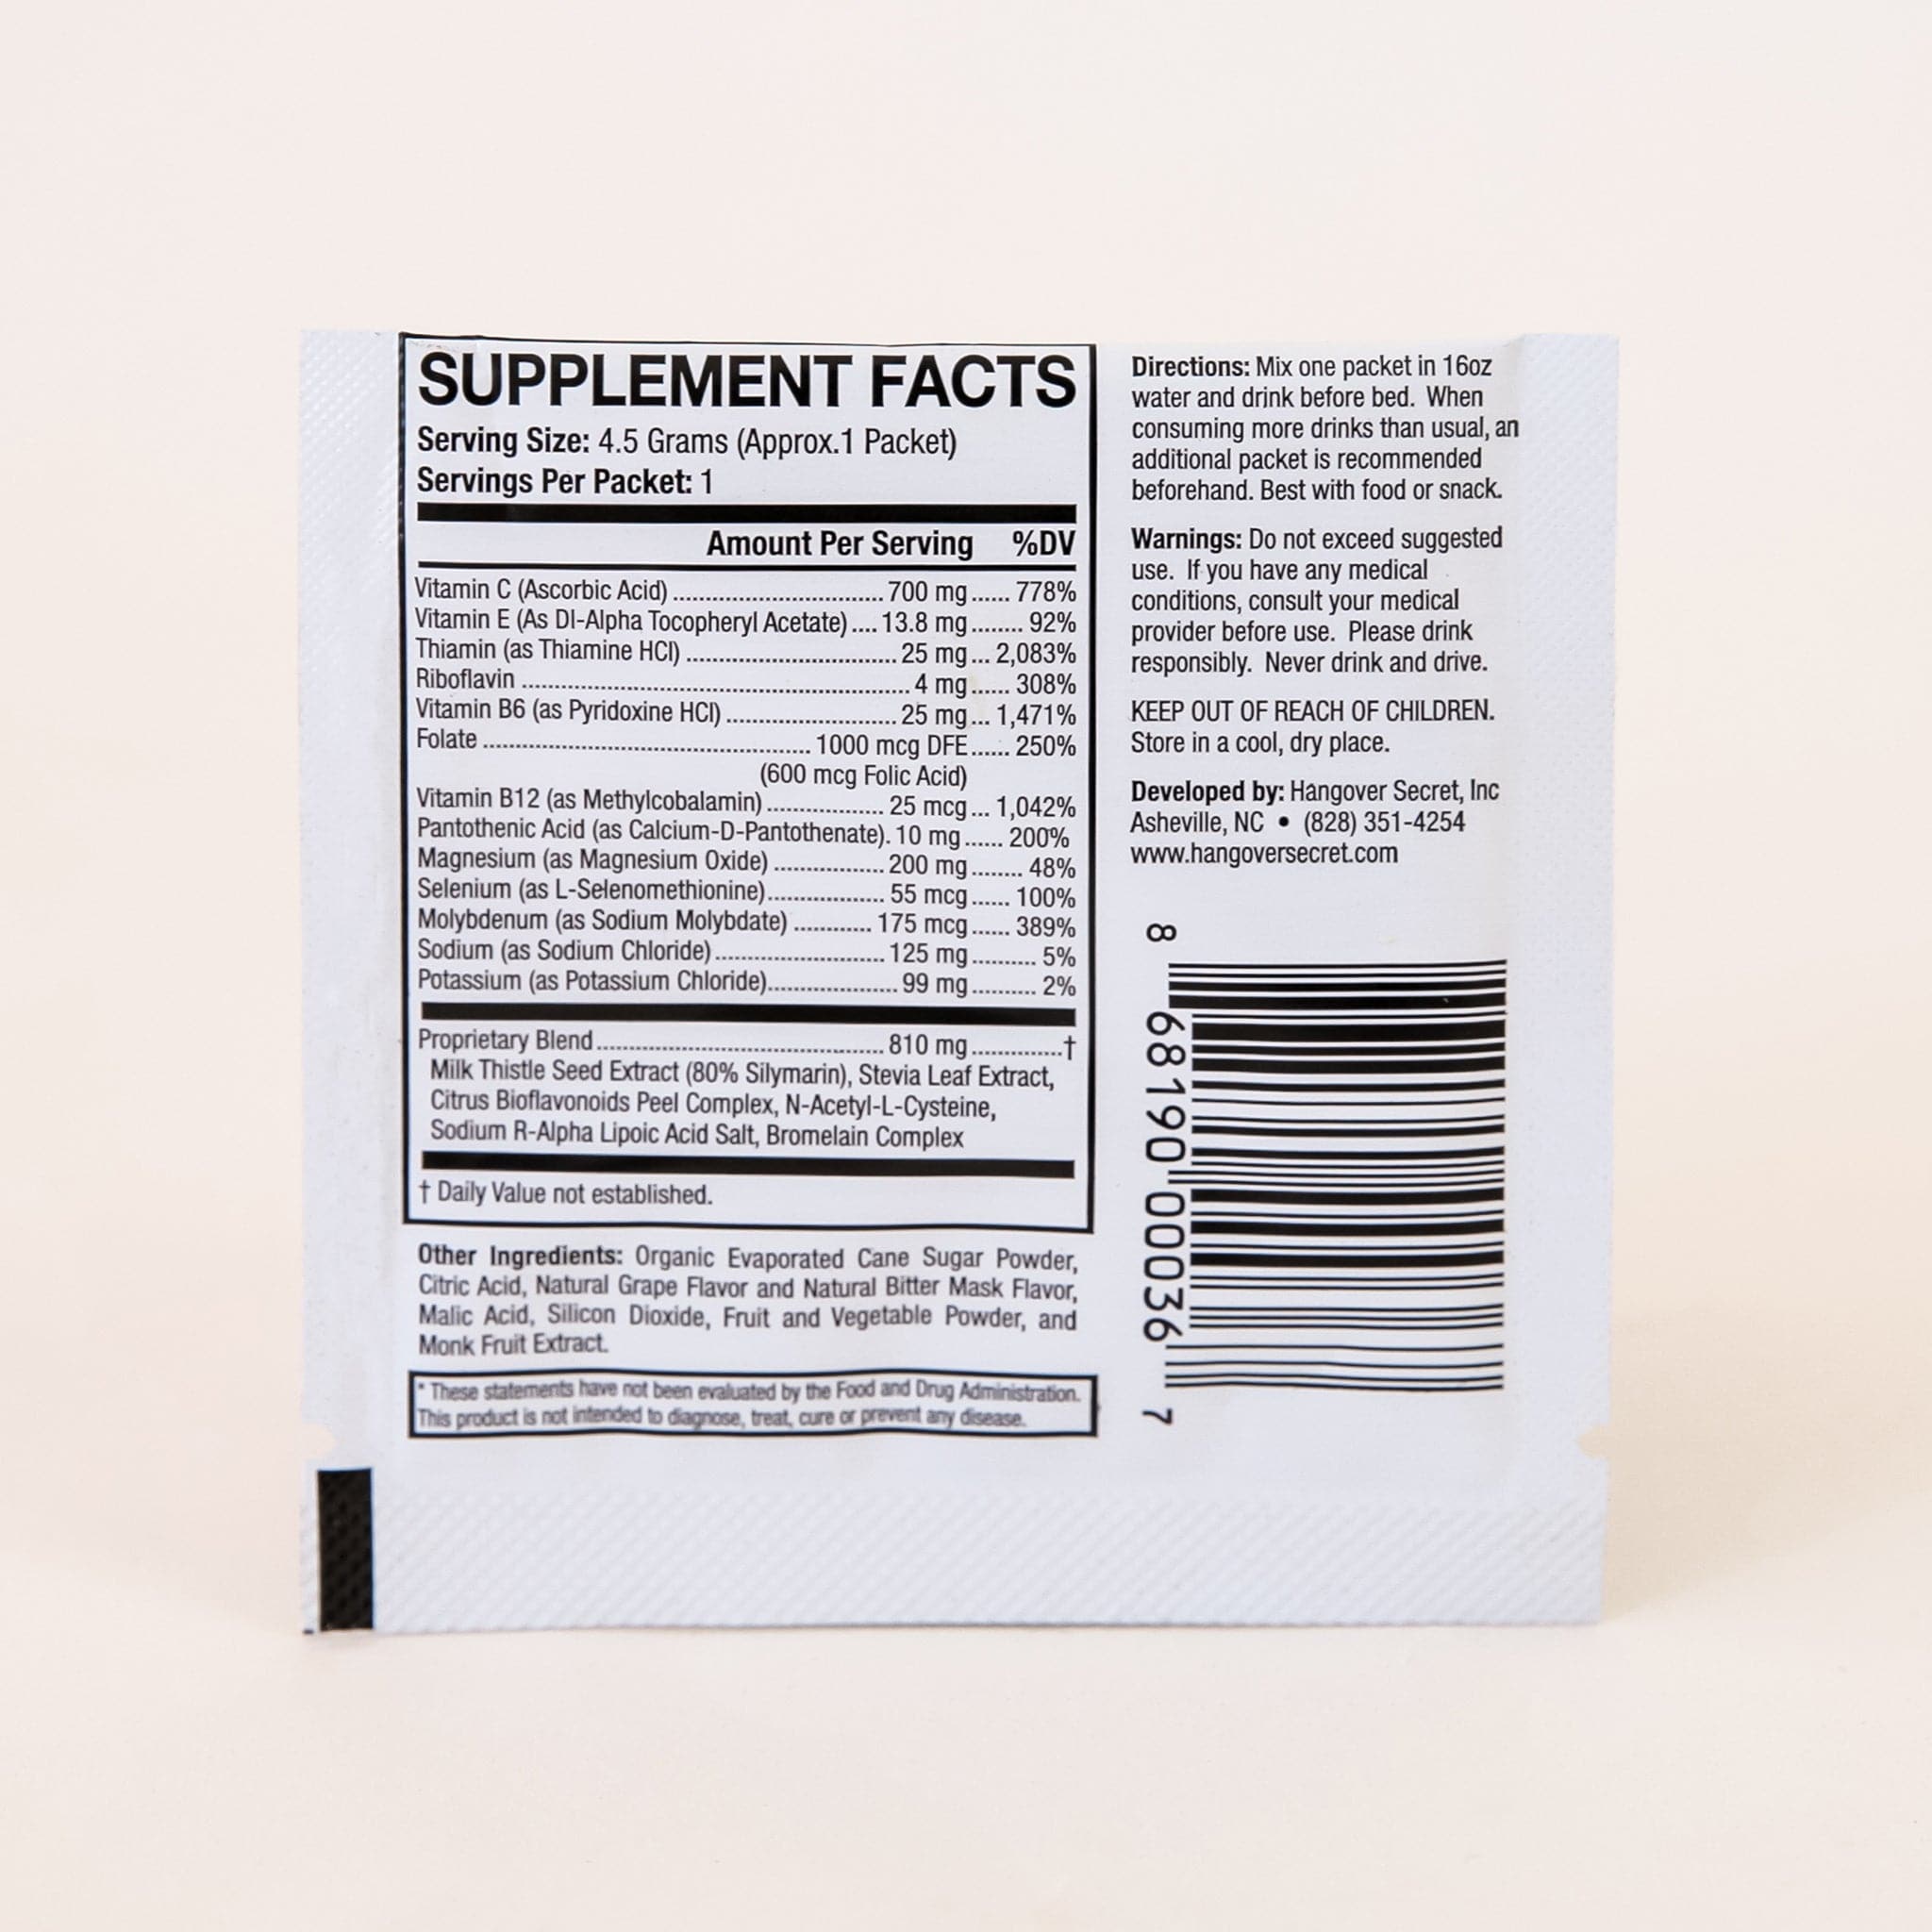 The back of the supplement packaging that lists all the supplement facts and  directions that explain to mix this packet wish 16oz of water and to drink before bed.